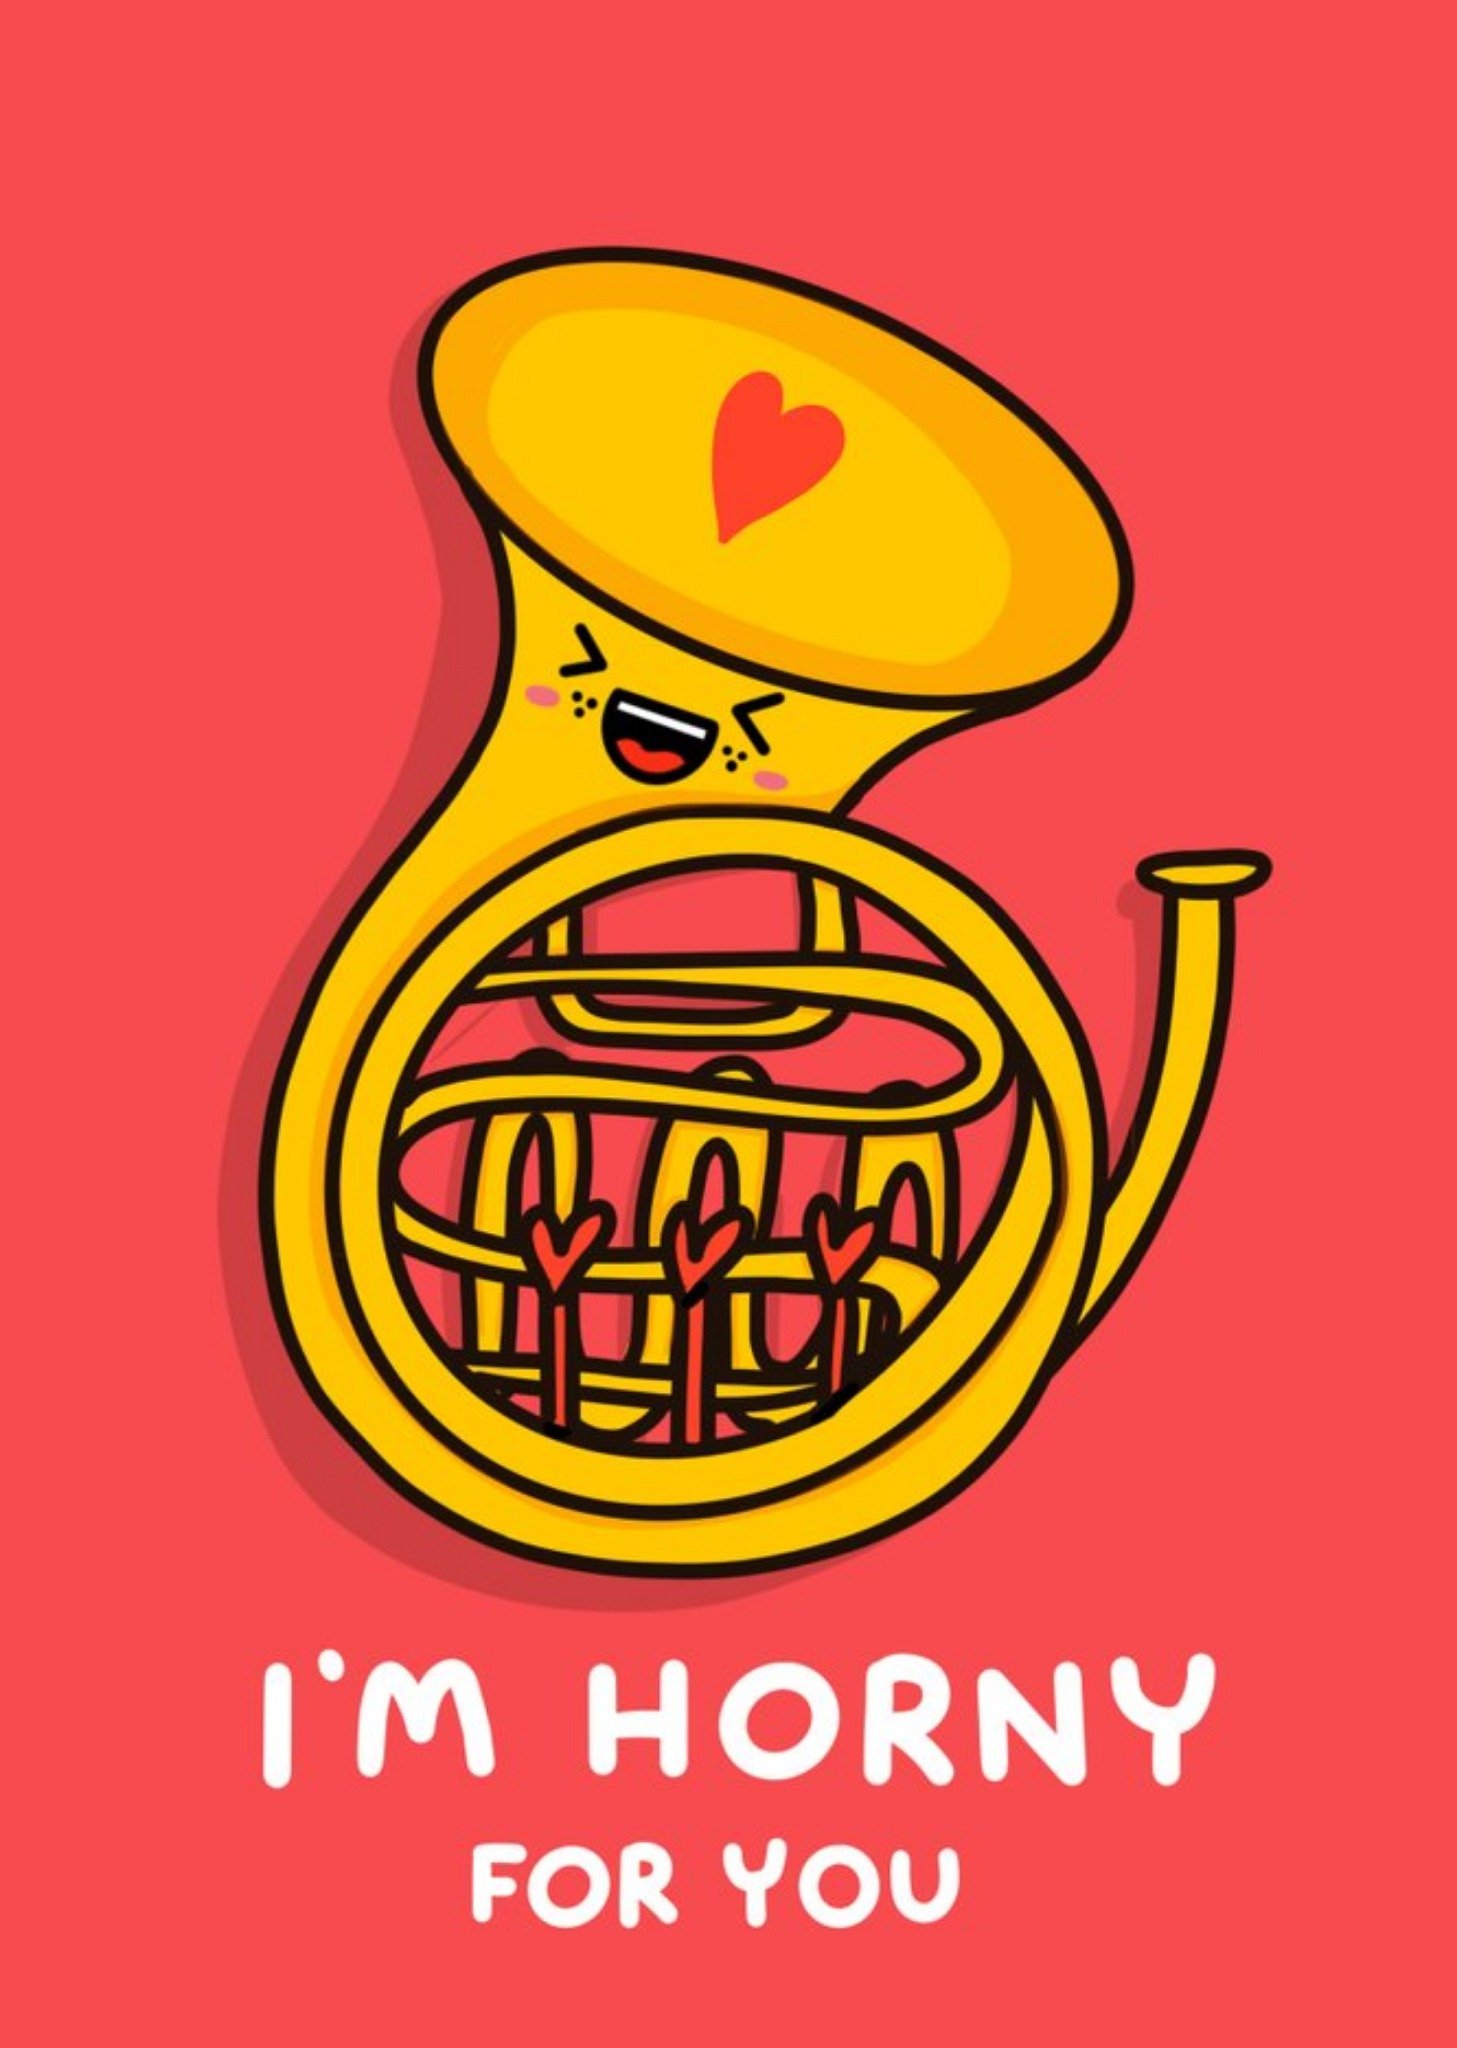 Moonpig Funny Illustrated I'm Horny For You Valentine's Day Card Ecard